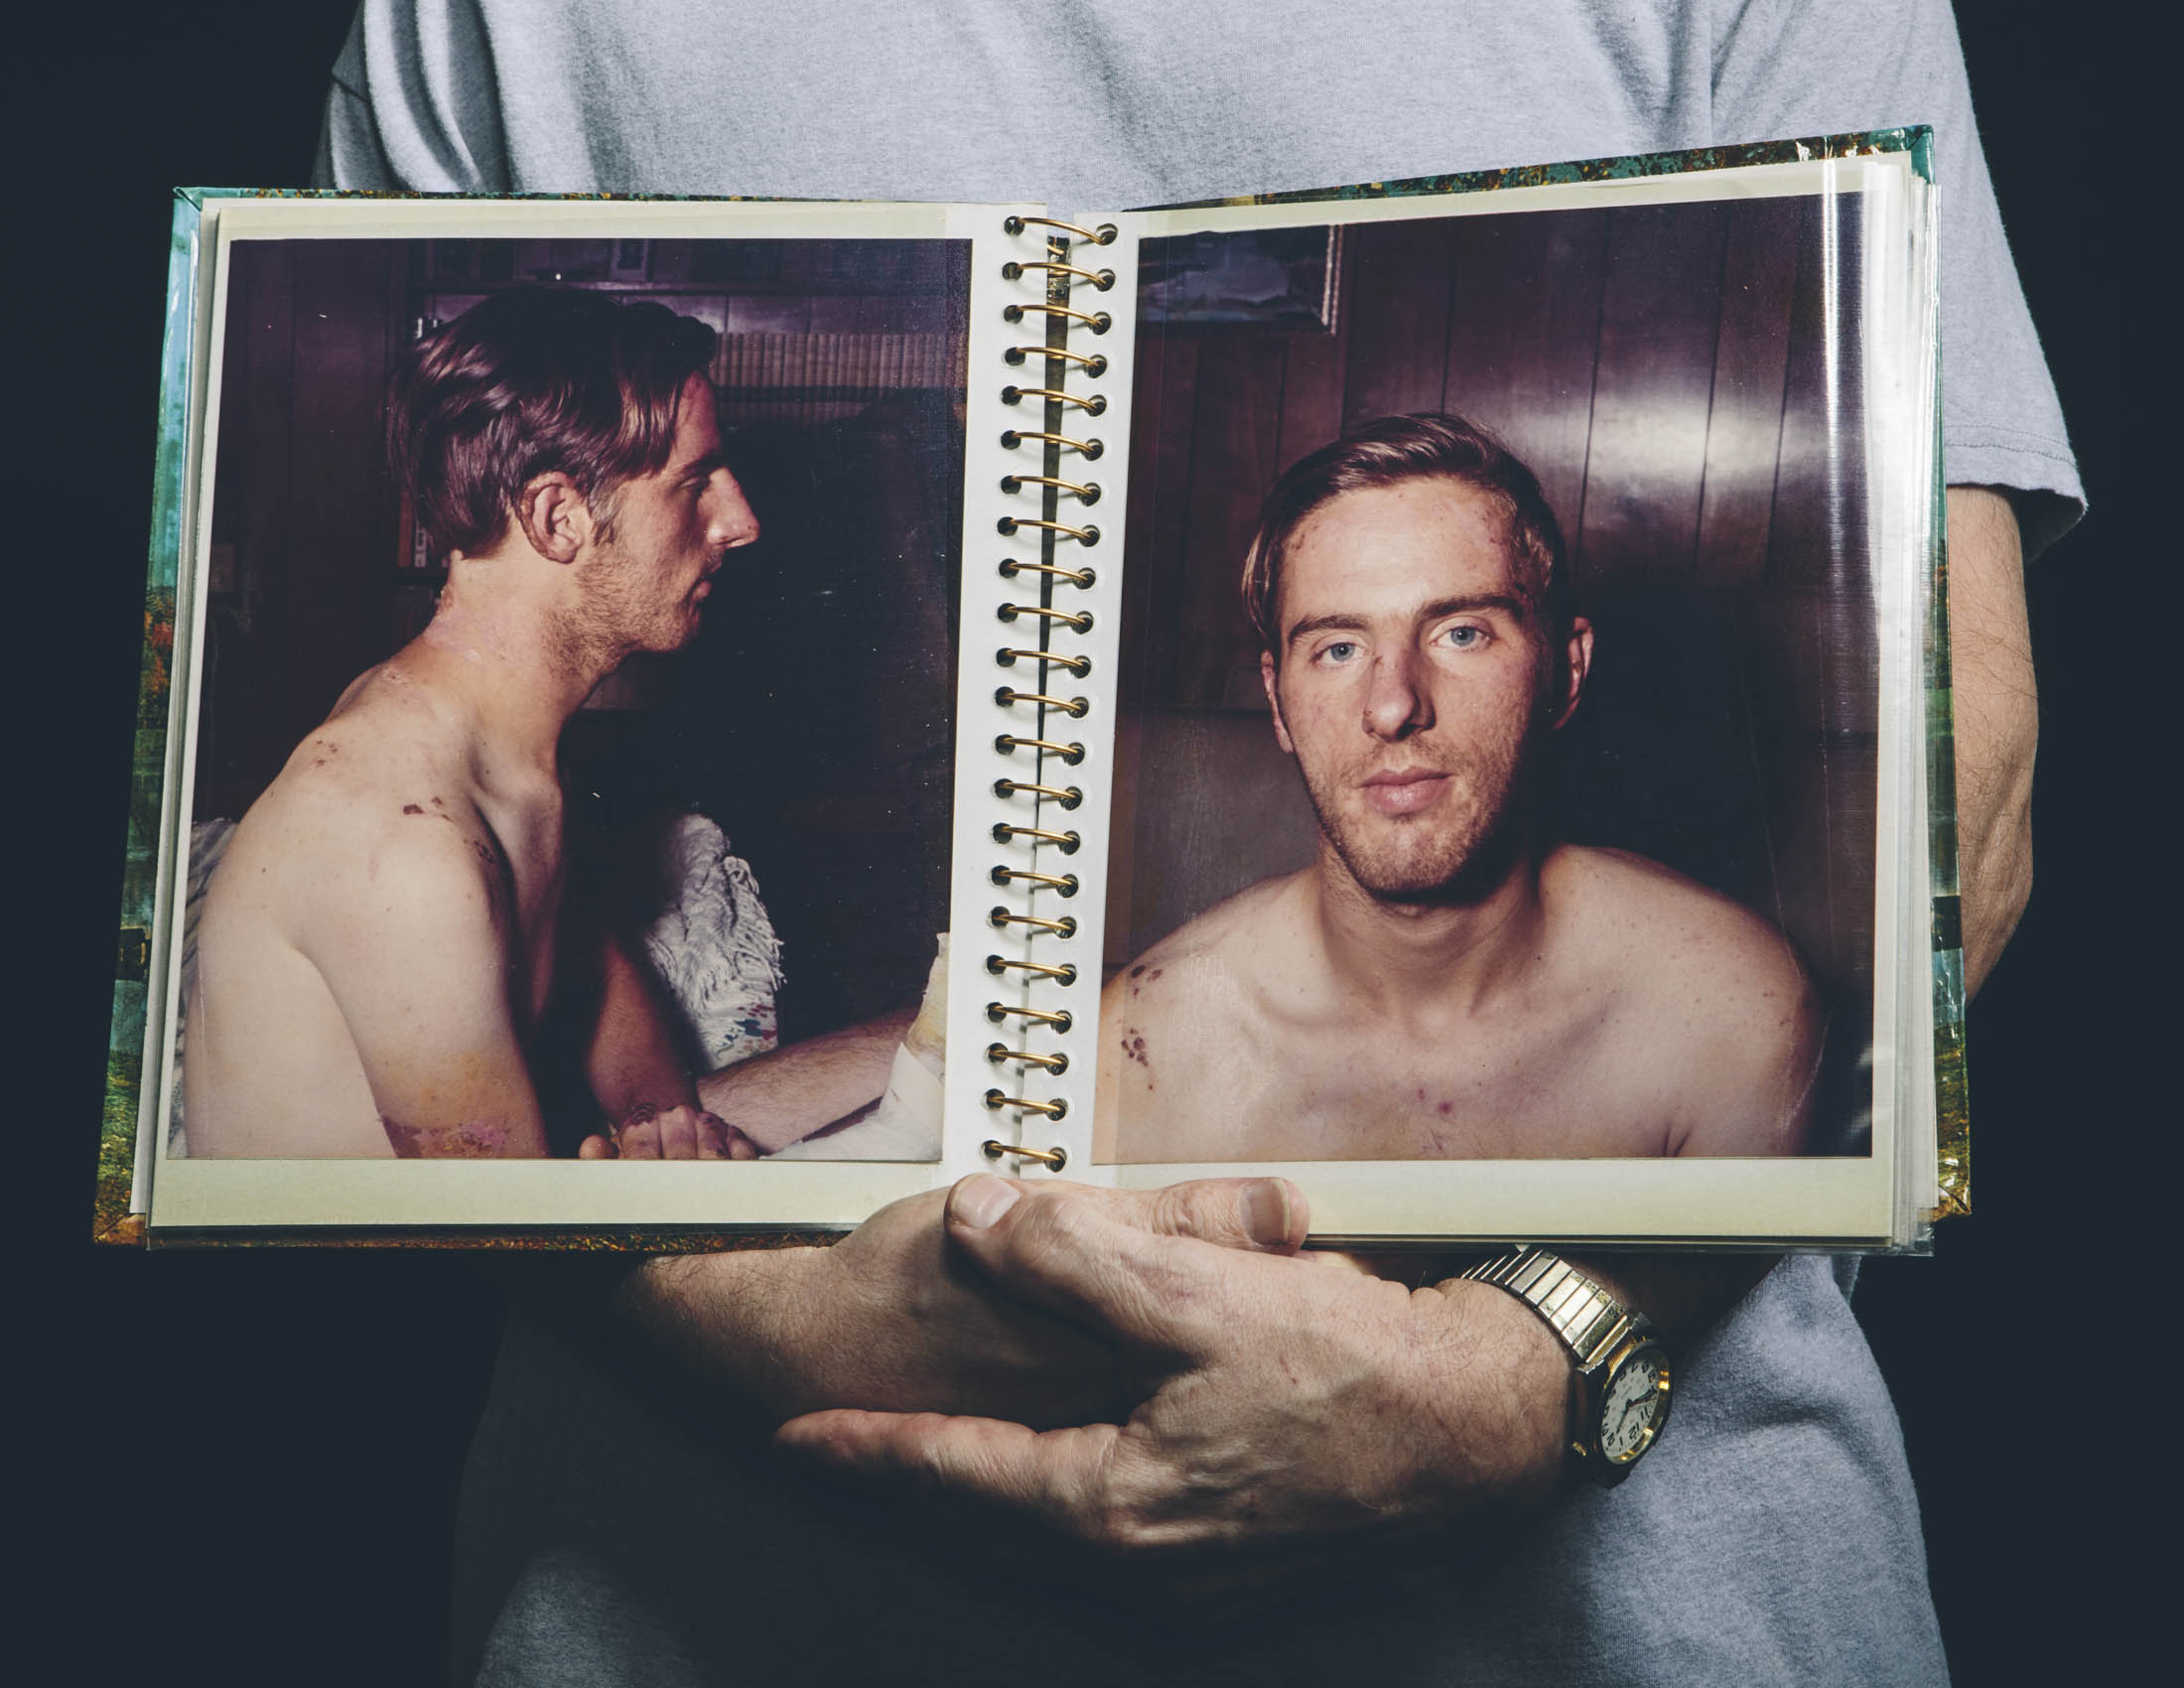 Francis Dufresne holding a photo album documenting his recovering from burns he suffered during the 1973 fire at the Upstairs Lounge in New Orleans, LA.